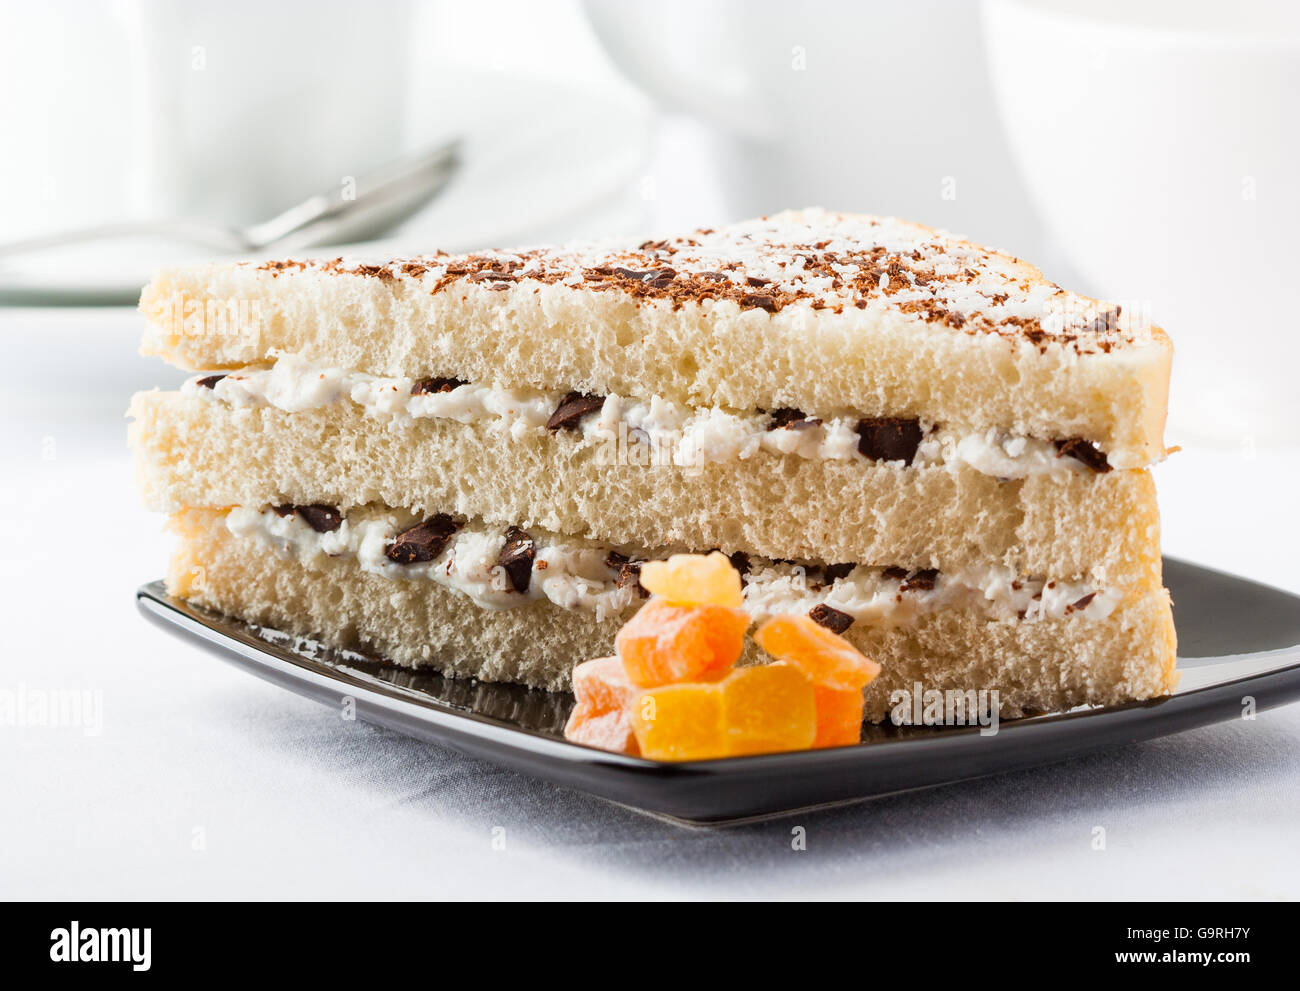 A sweet layered sandwich with ricotta cheese and chocolate chunks Stock Photo